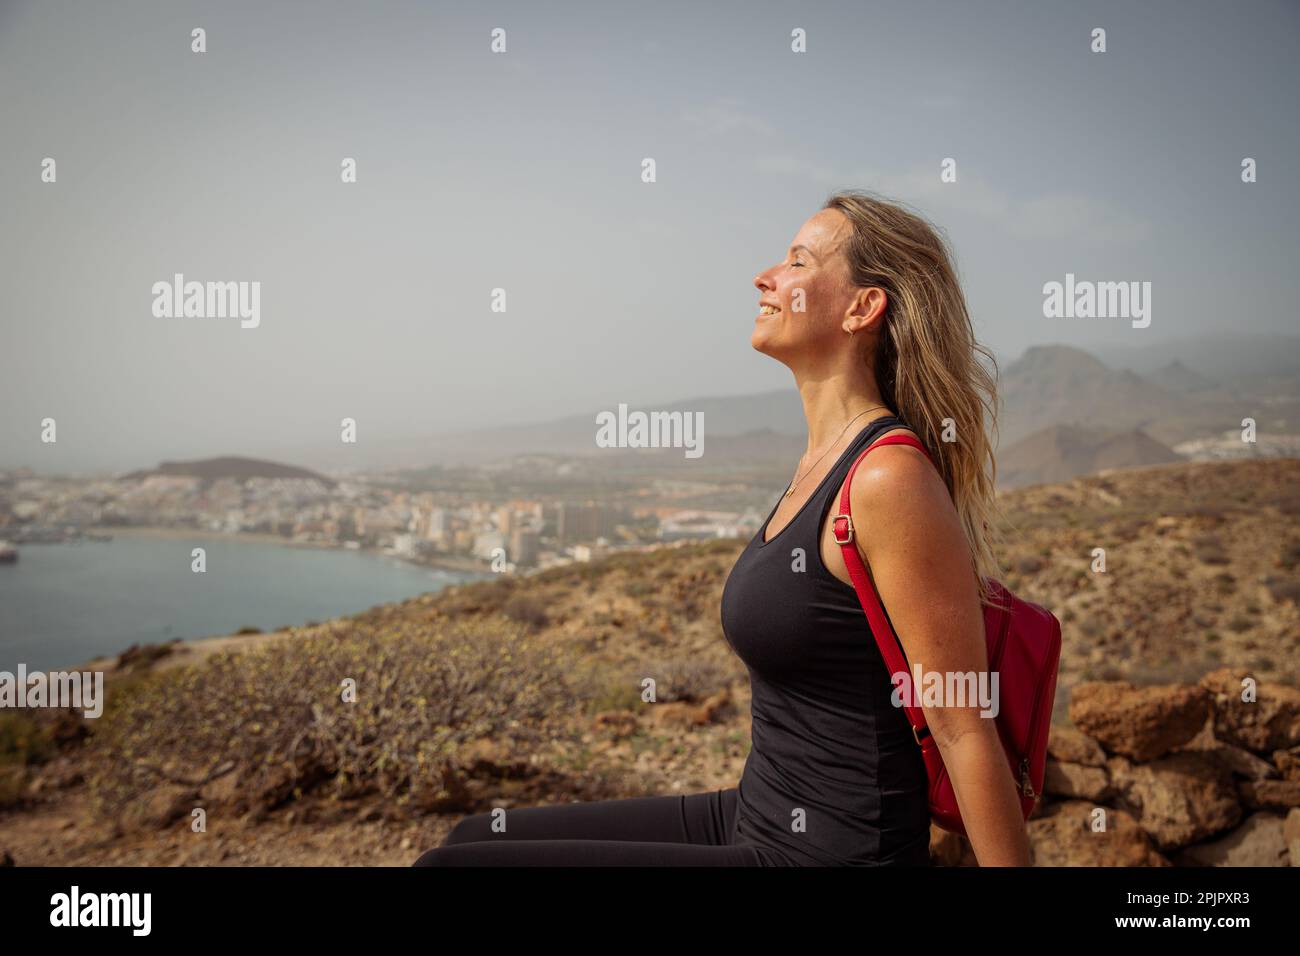 A female hiker relaxes by breathing fresh air on a hike, nature lover. Stock Photo